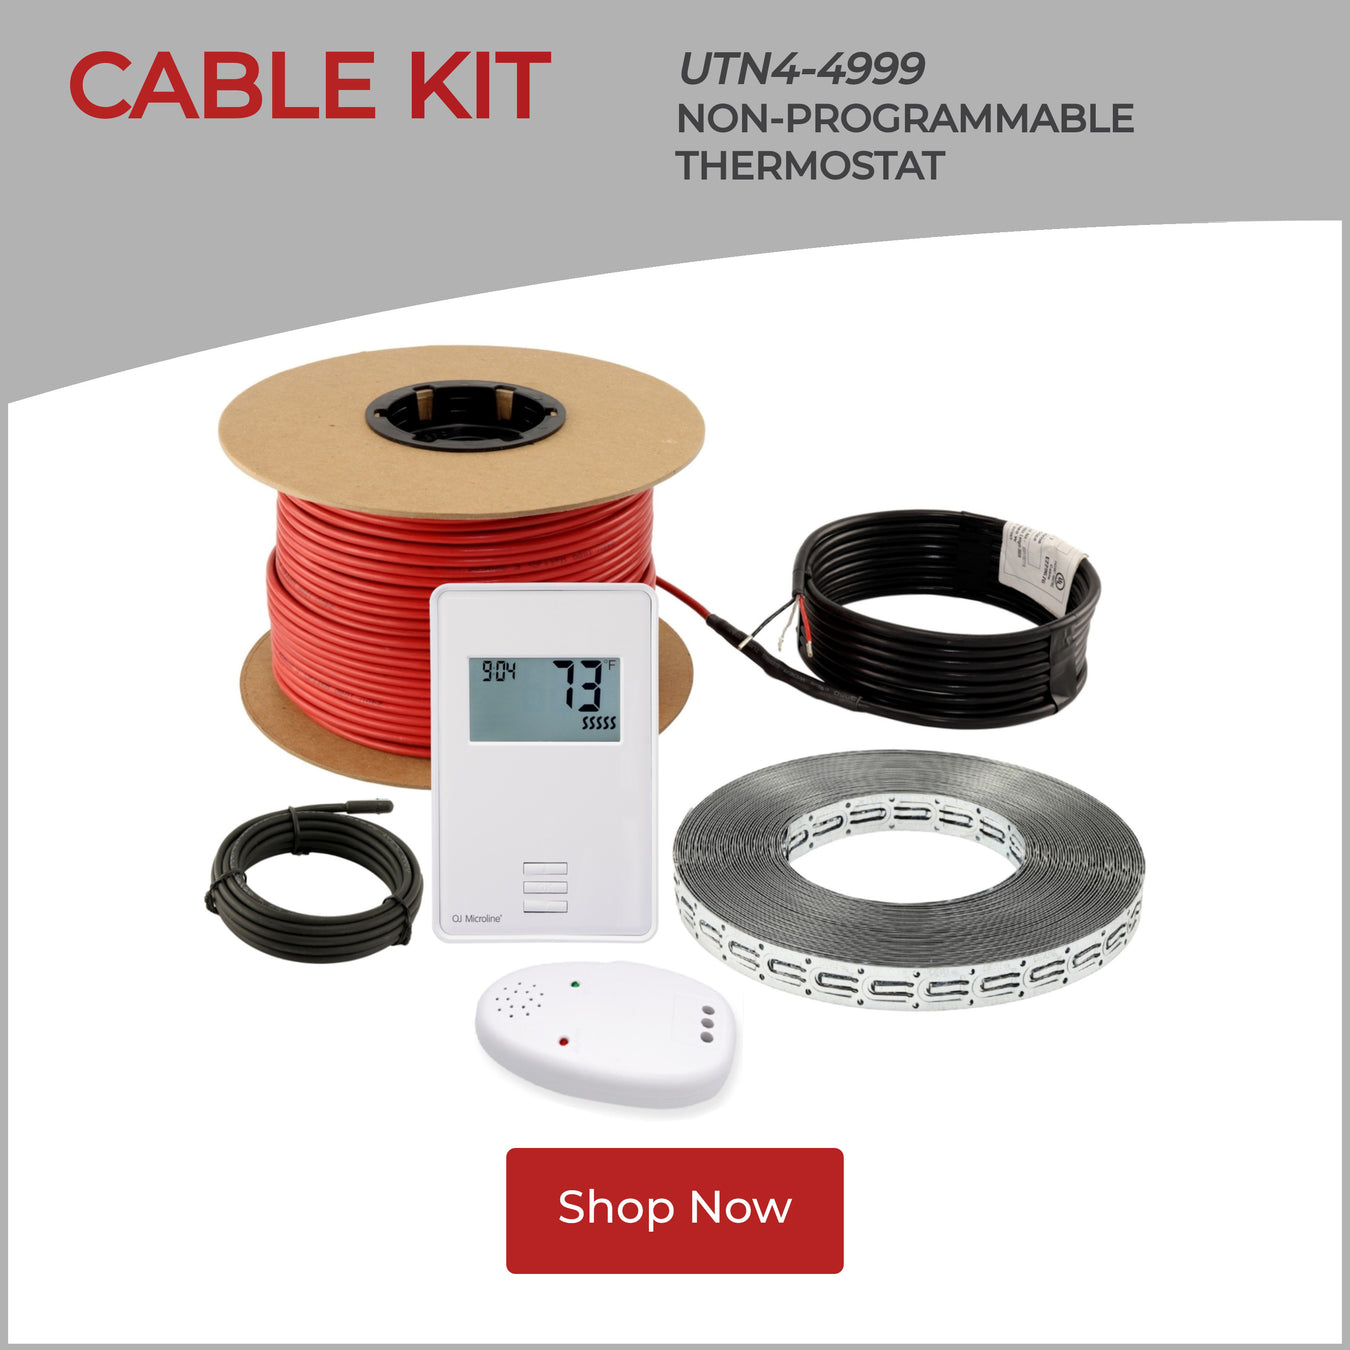 Overview_-_Cable_Kit_with_UTN4_Strapping_189b21fb-6f1a-460b-a447-7adb337b5d15